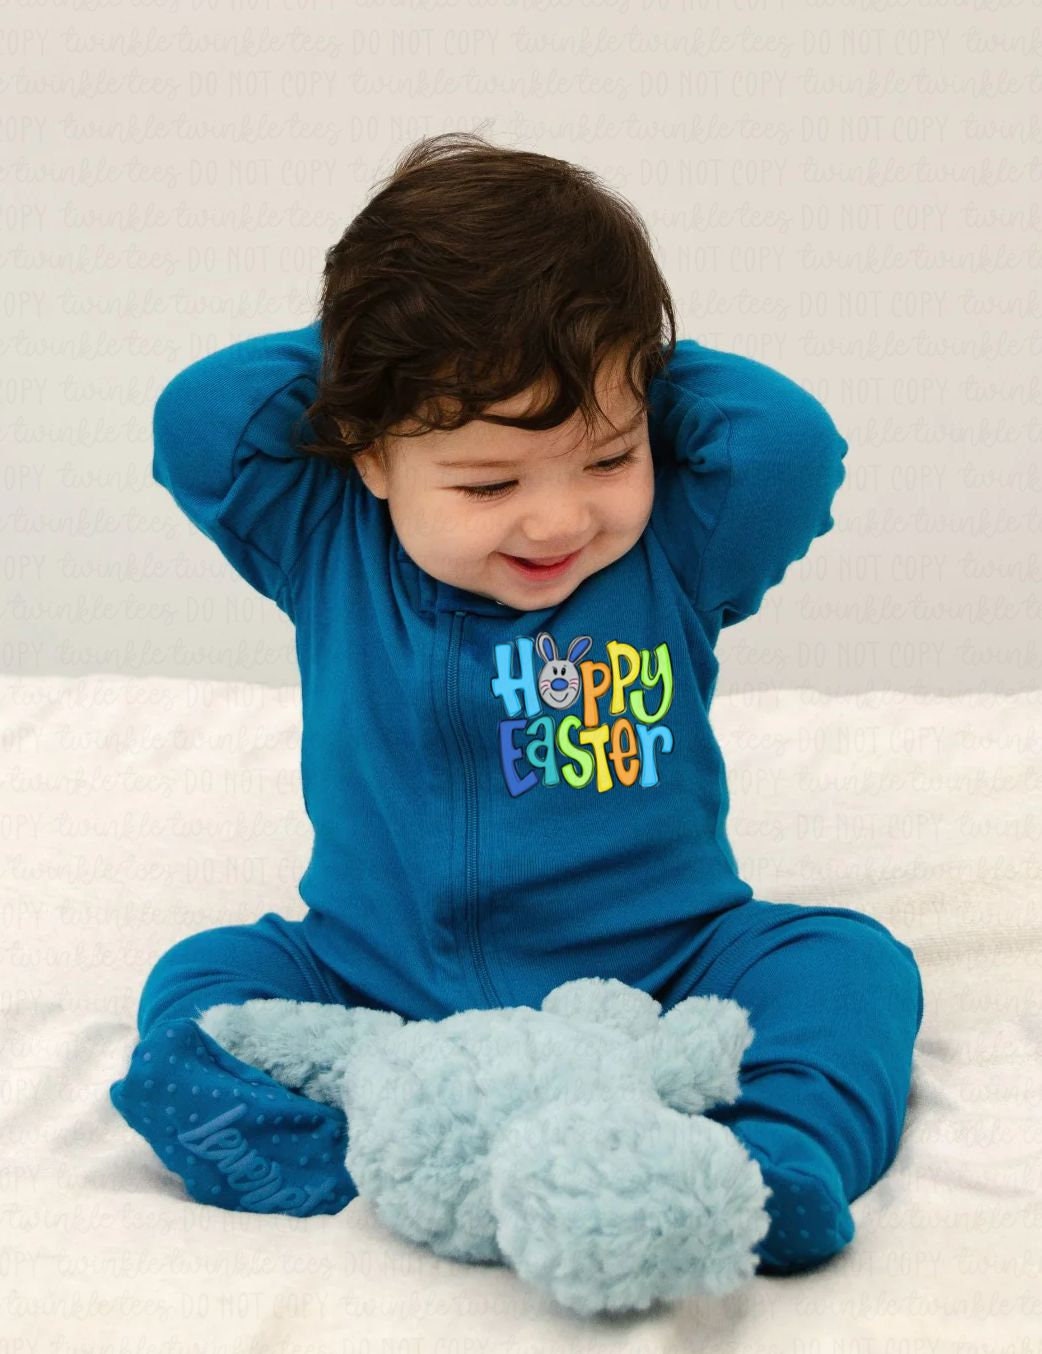 Happy Easter Solid Teal or Peach Pajamas, easter pajamas for the family, matching easter pajamas